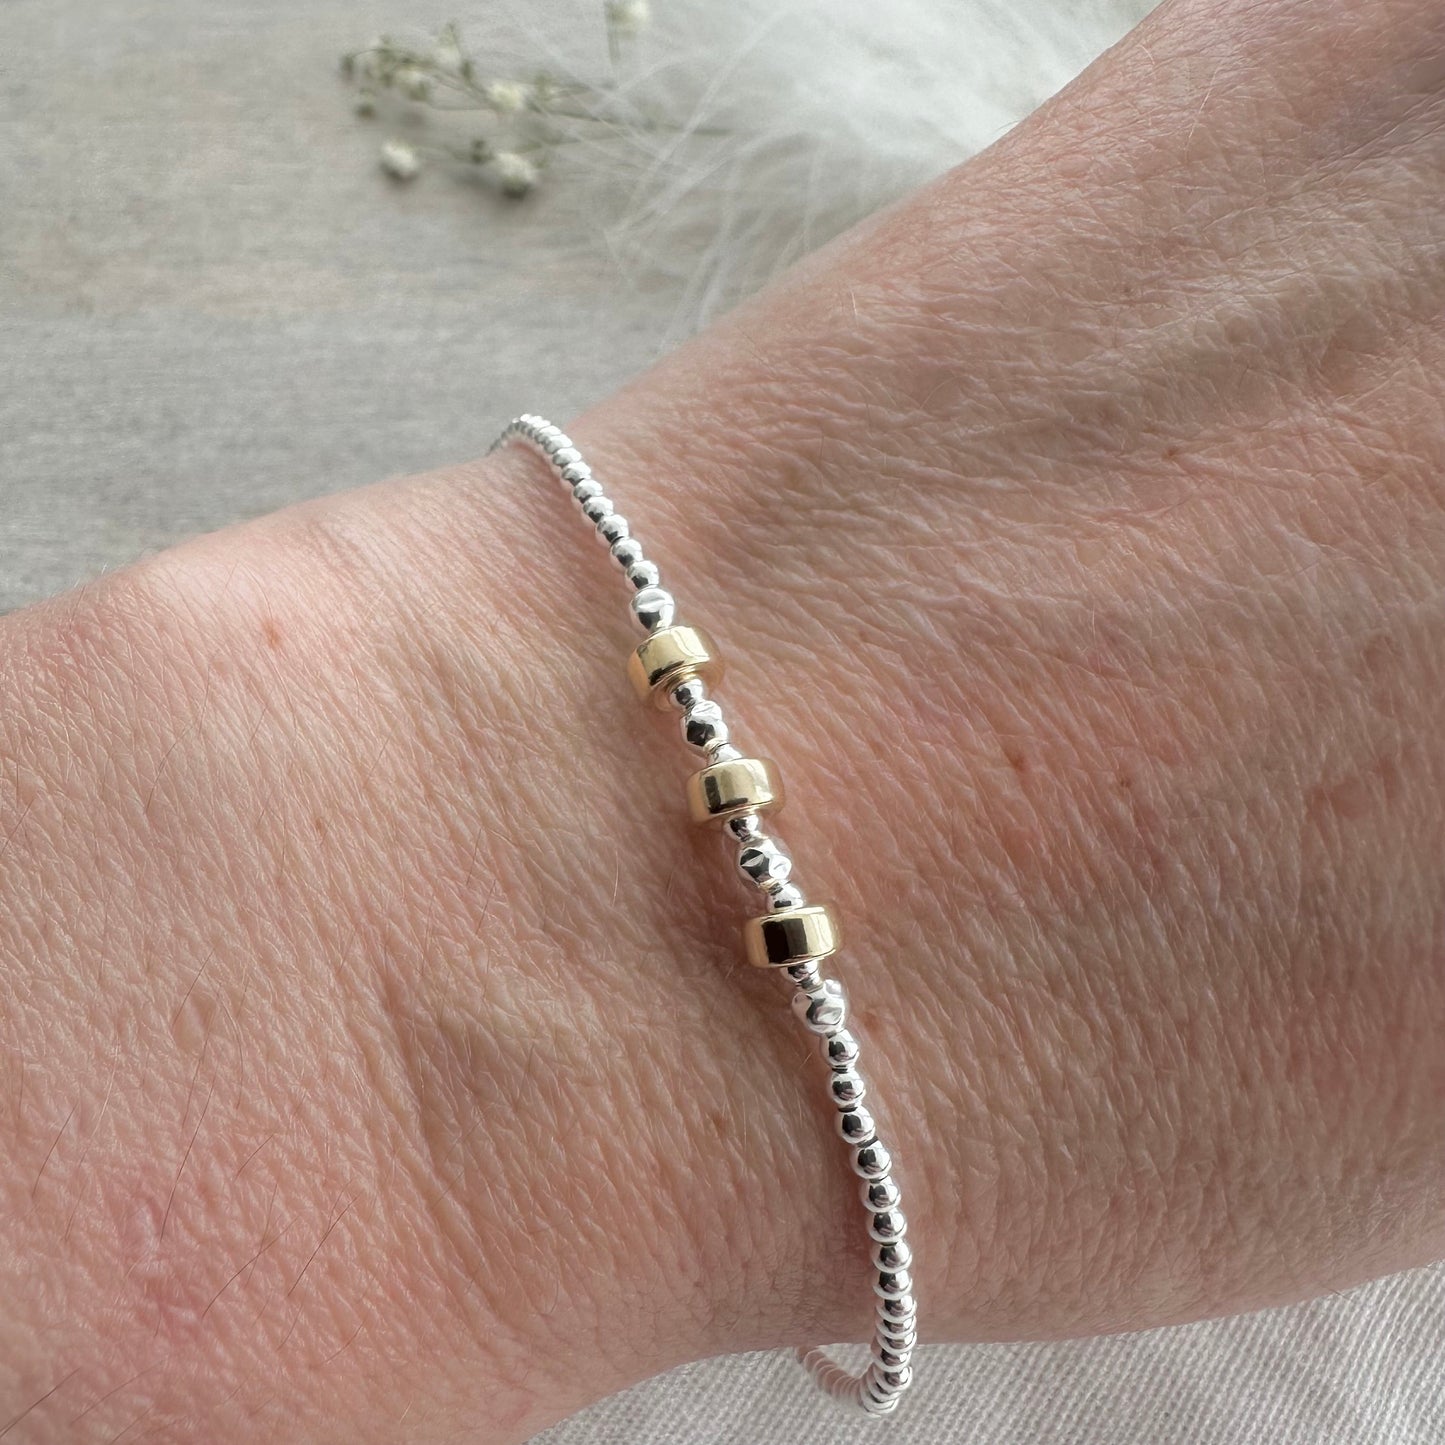 3 Decade Bracelet 30th Birthday Jewellery Gift for Her in Sterling Silver